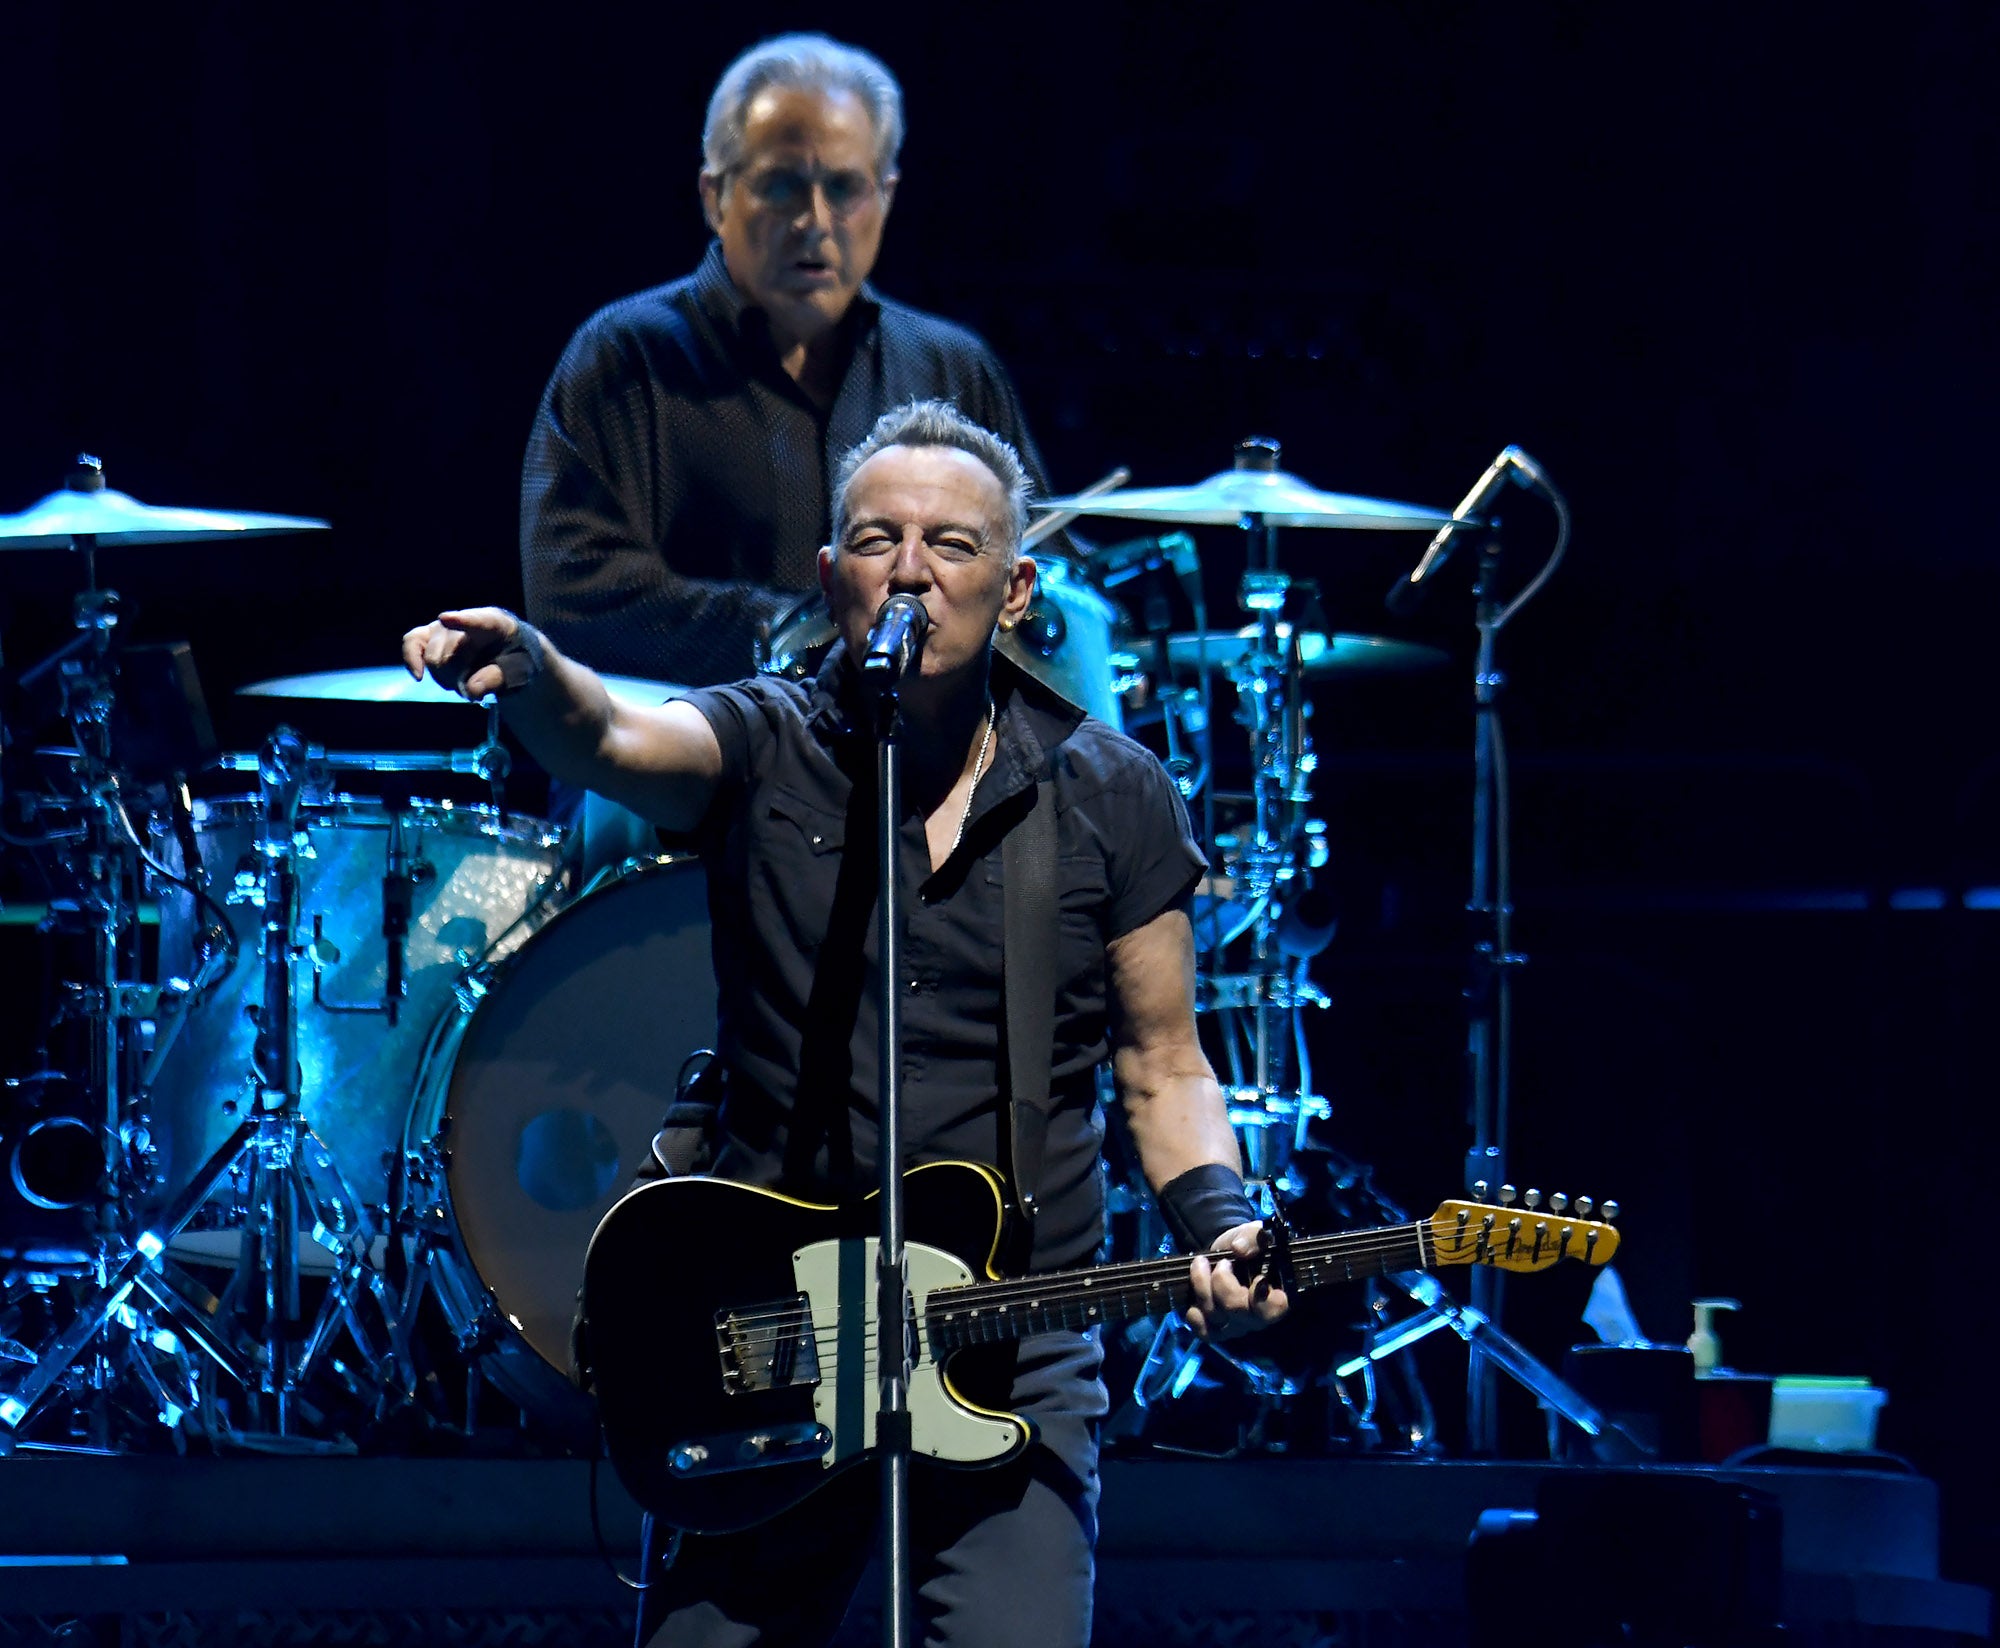 Bruce Springsteen Joins Dropkick Murphys for Performance at Empty